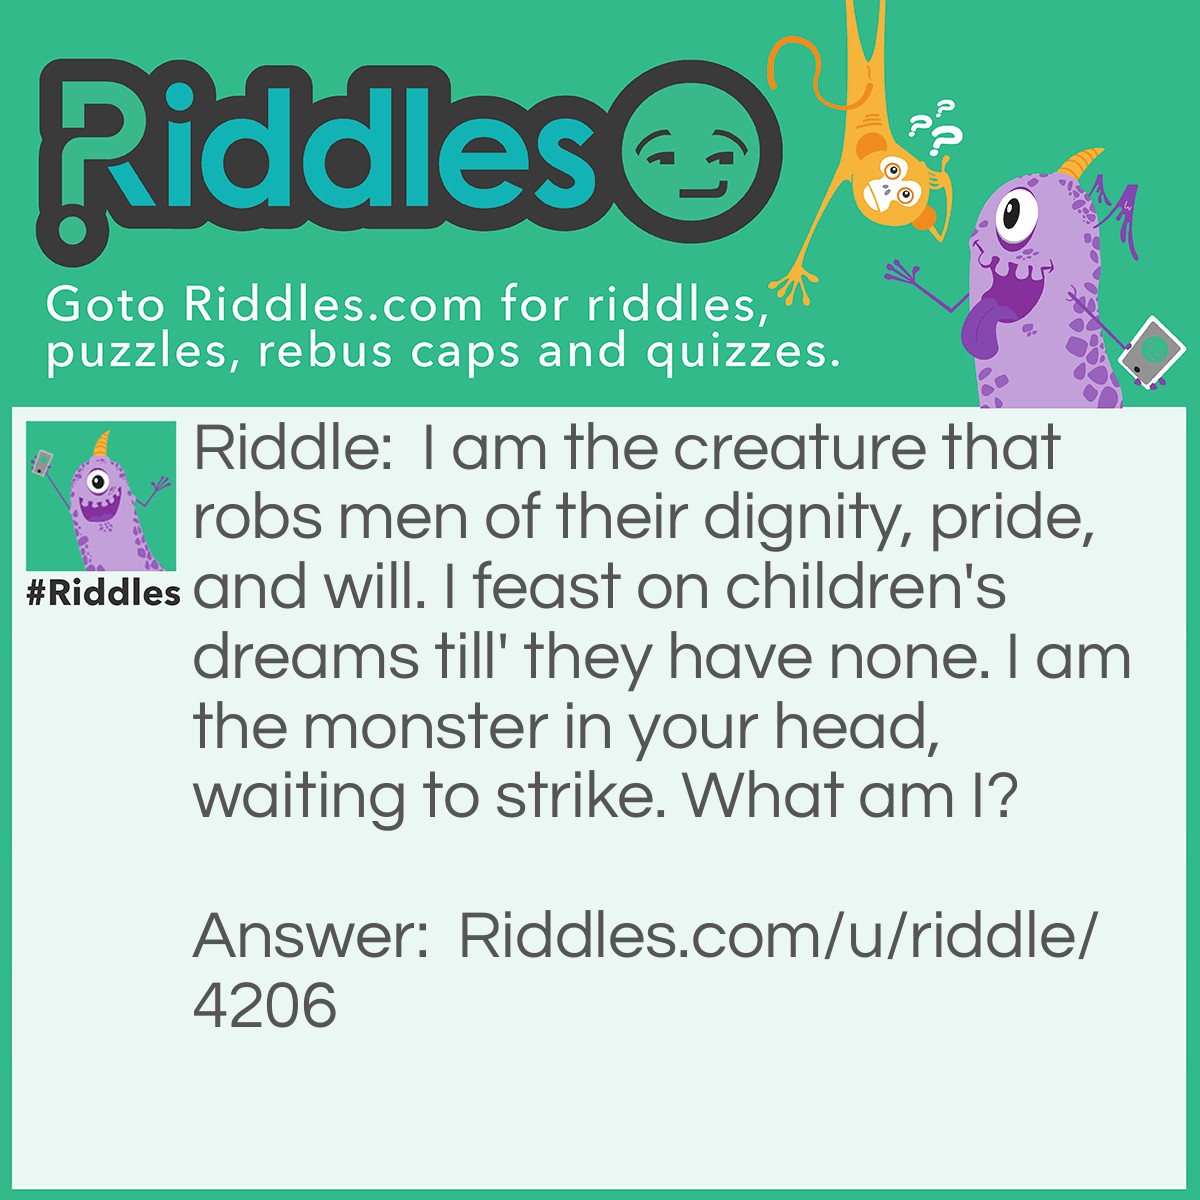 Riddle: I am the creature that robs men of their dignity, pride, and will. I feast on children's dreams till' they have none. I am the monster in your head, waiting to strike. What am I? Answer: I am fear, SO FEAR ME!